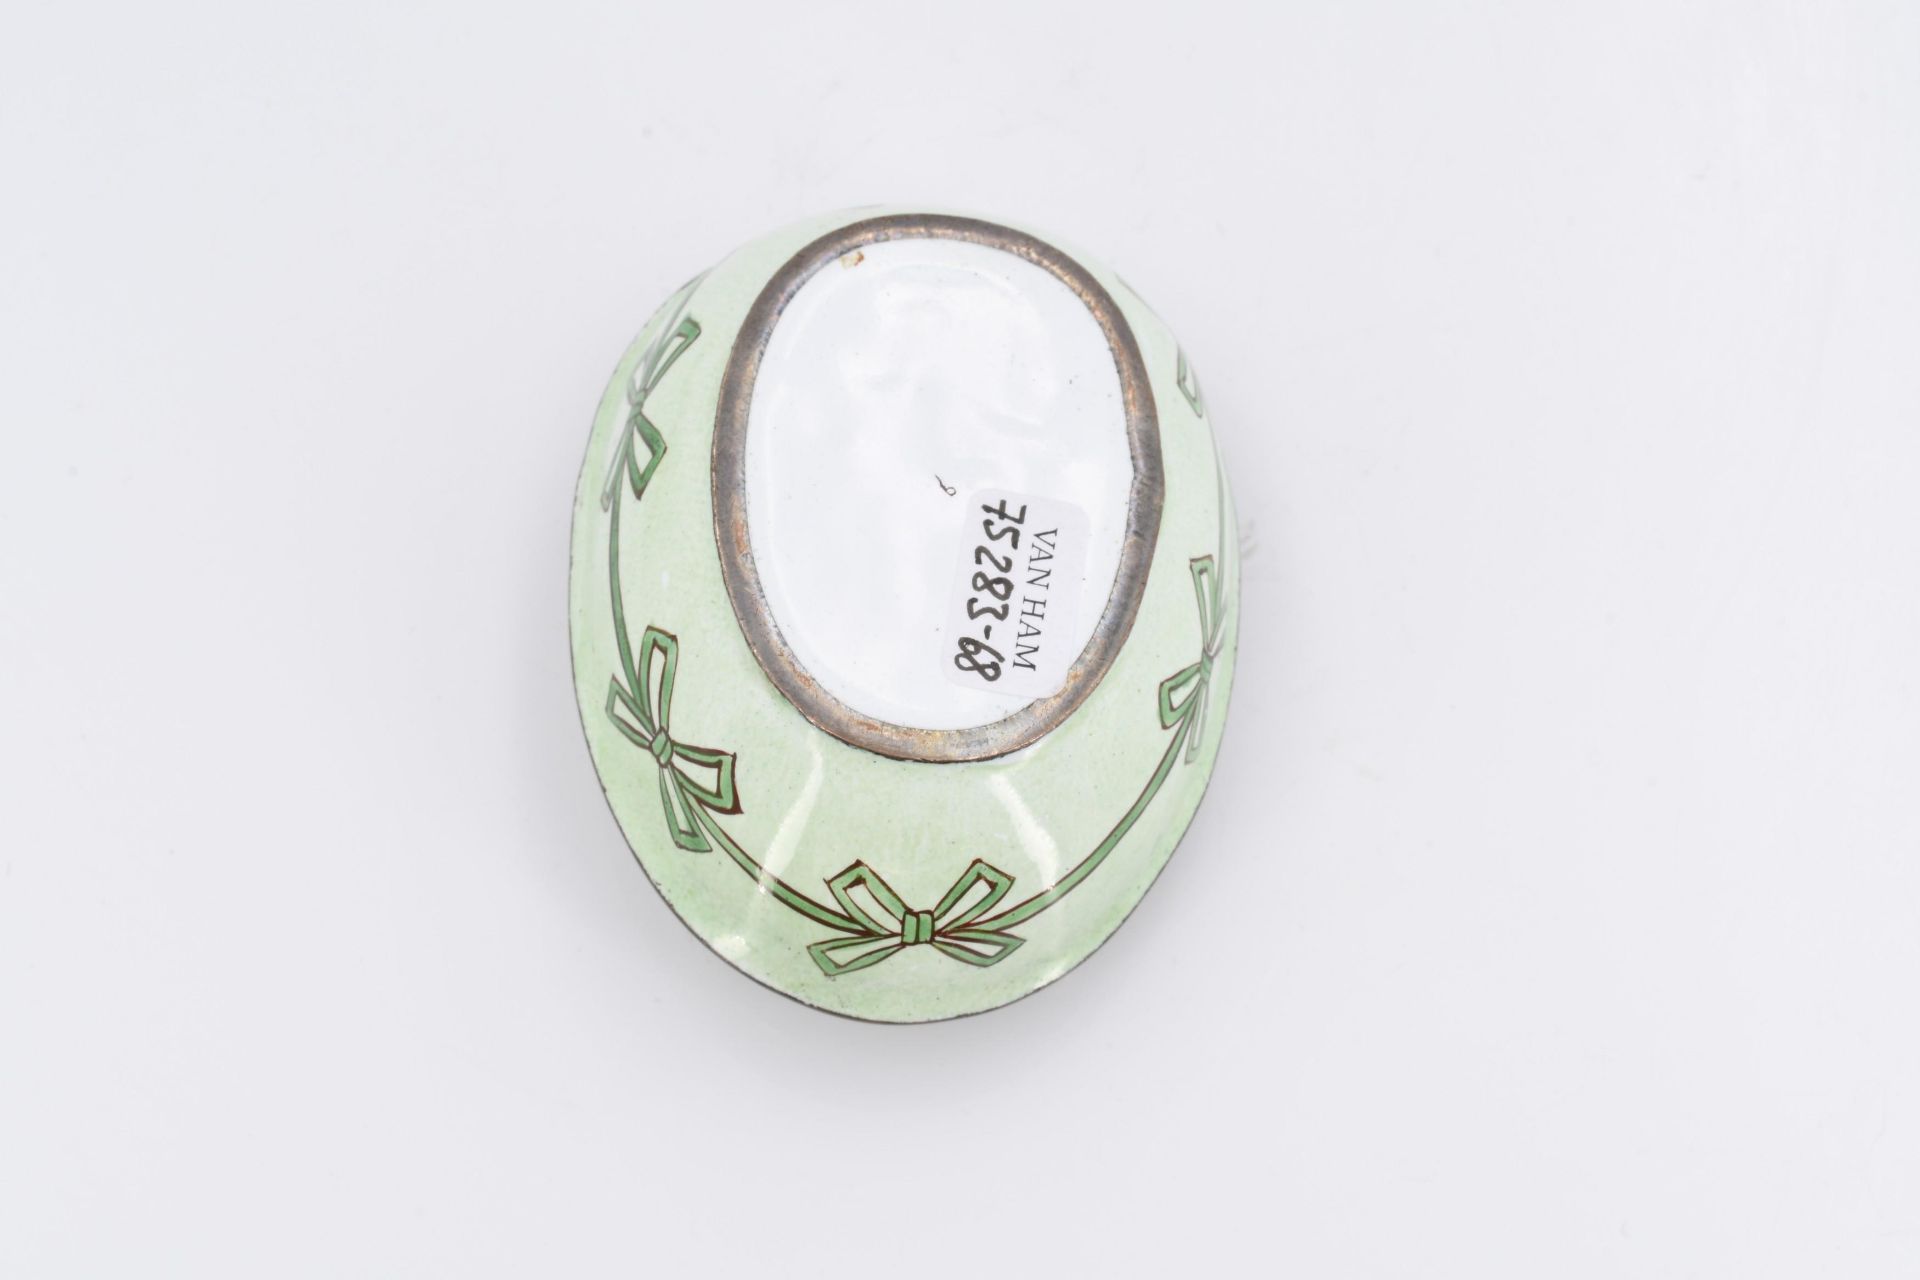 Small table clock in egg-shaped case with amoretto - Image 6 of 8